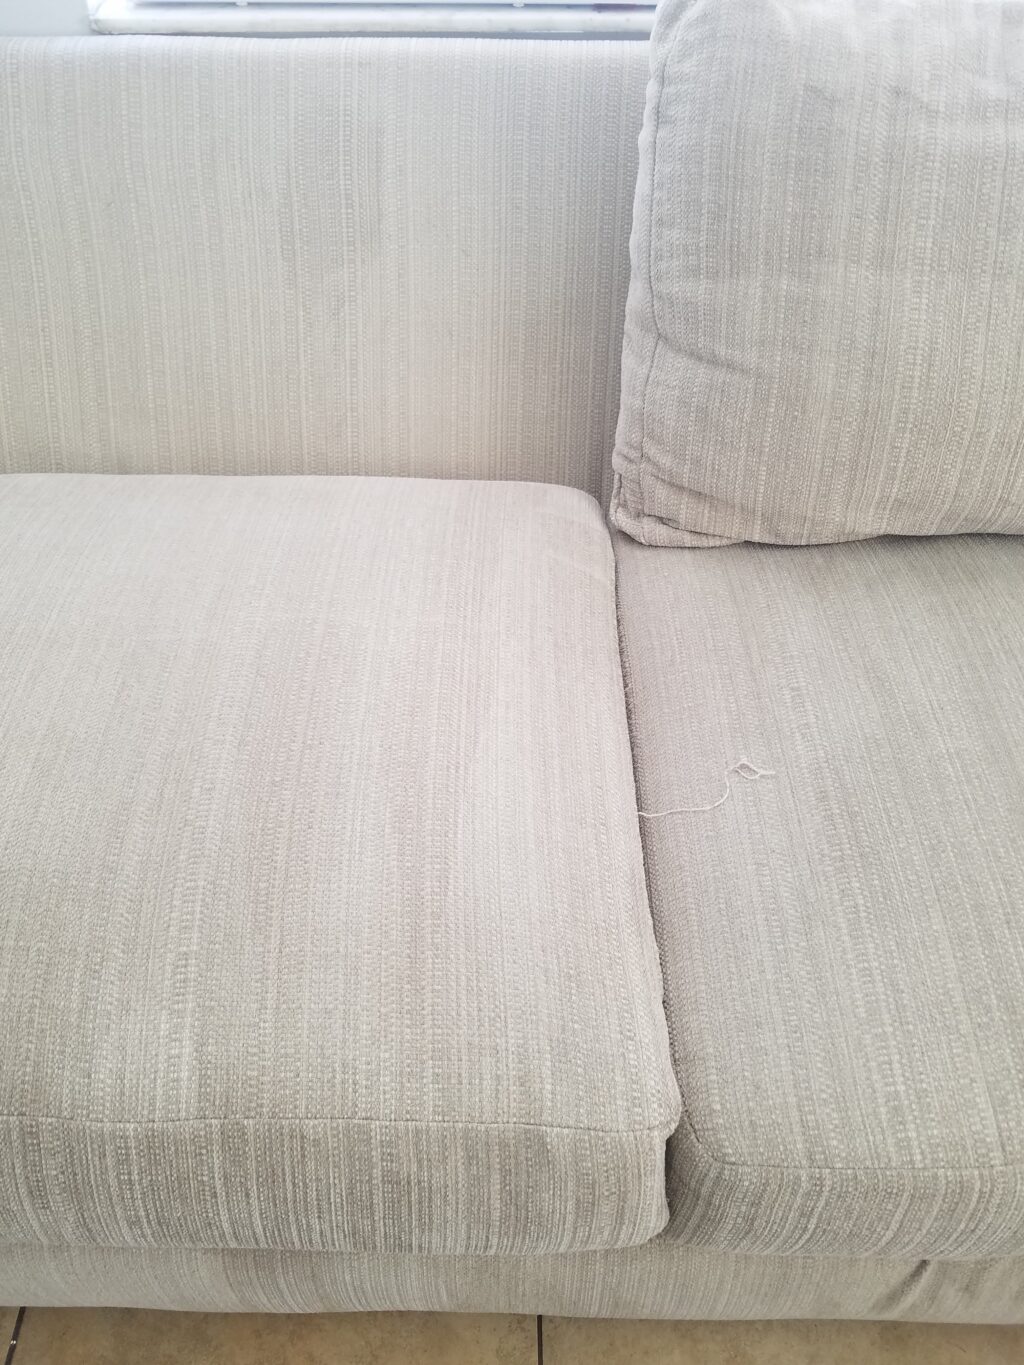 image of couch for sonshine carpet cleaning